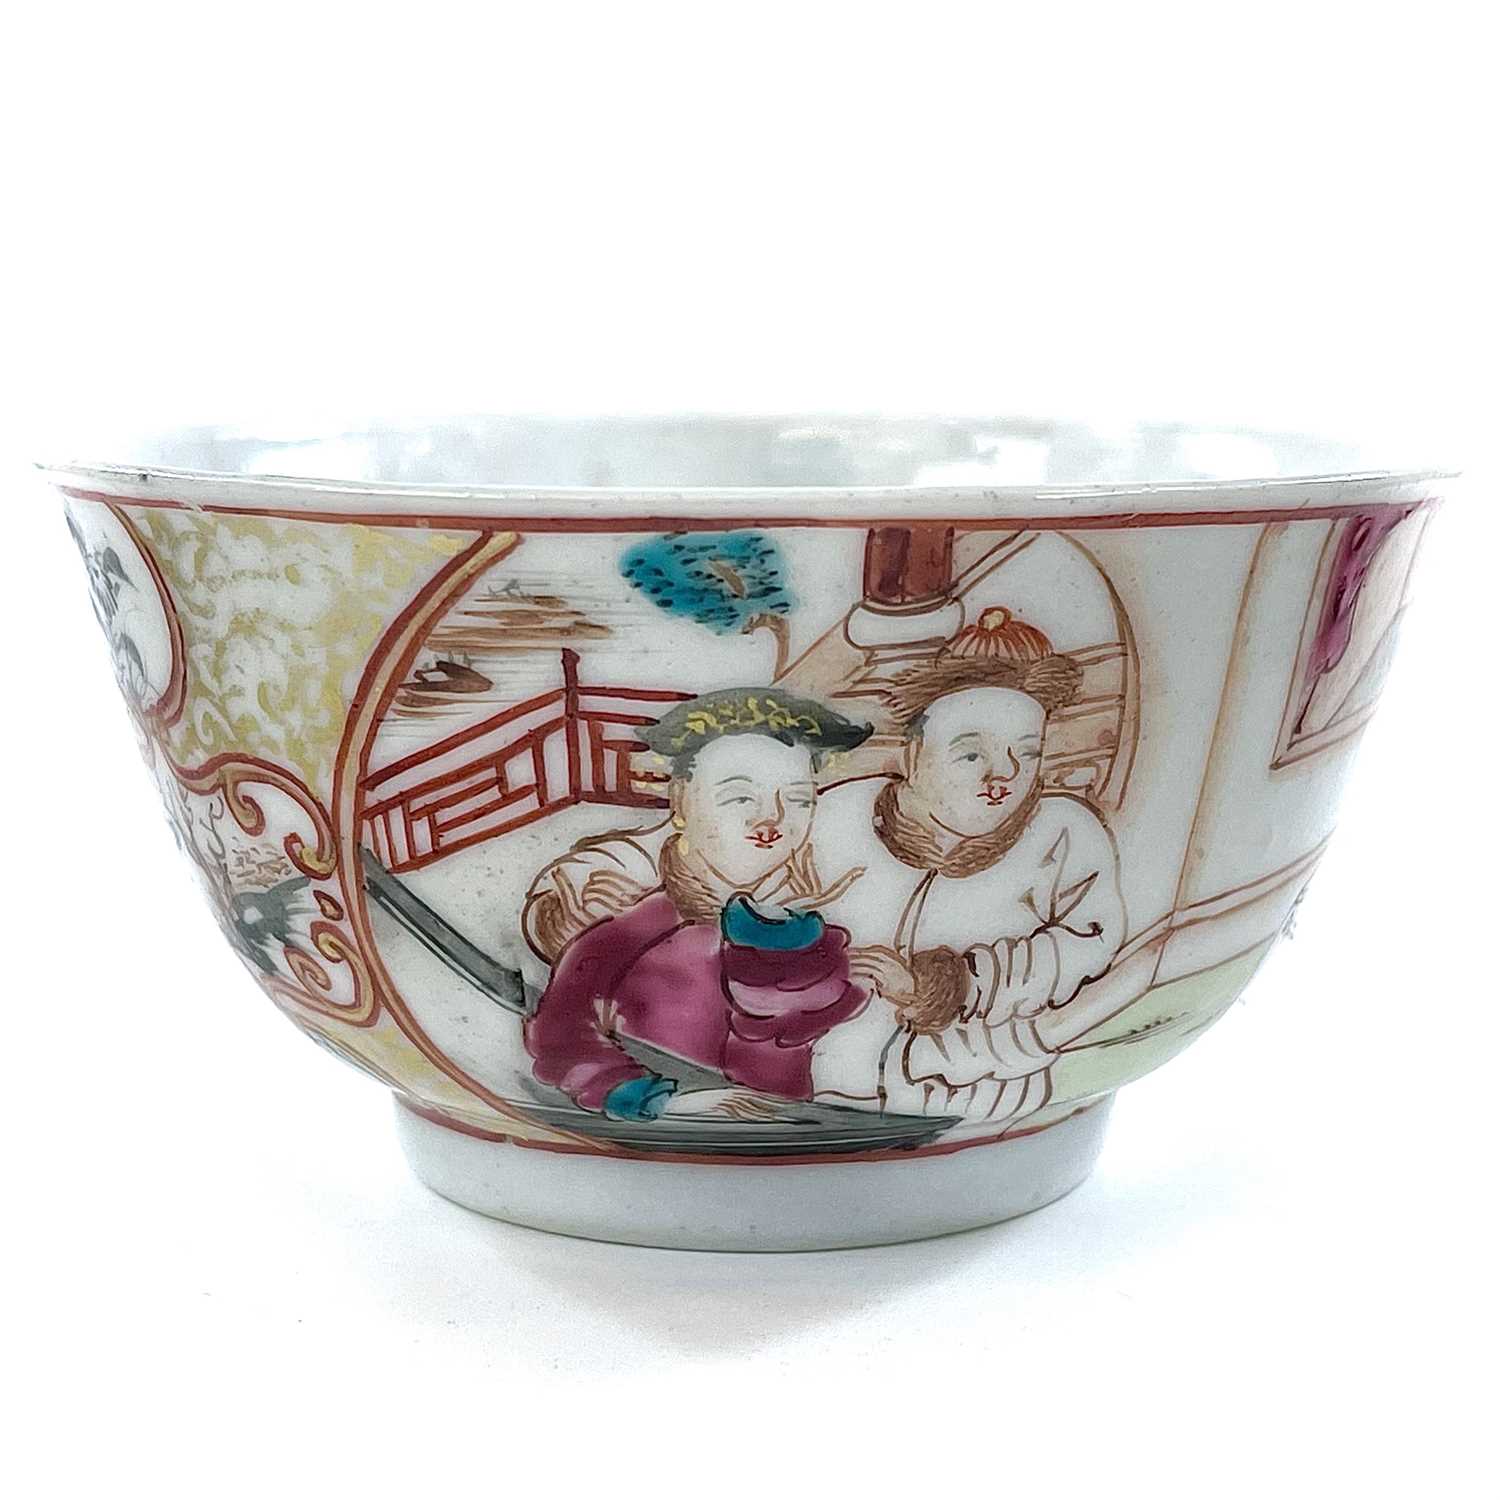 A Chinese famille rose porcelain tea bowl, 18th century, highlighted in gilt and decorated with